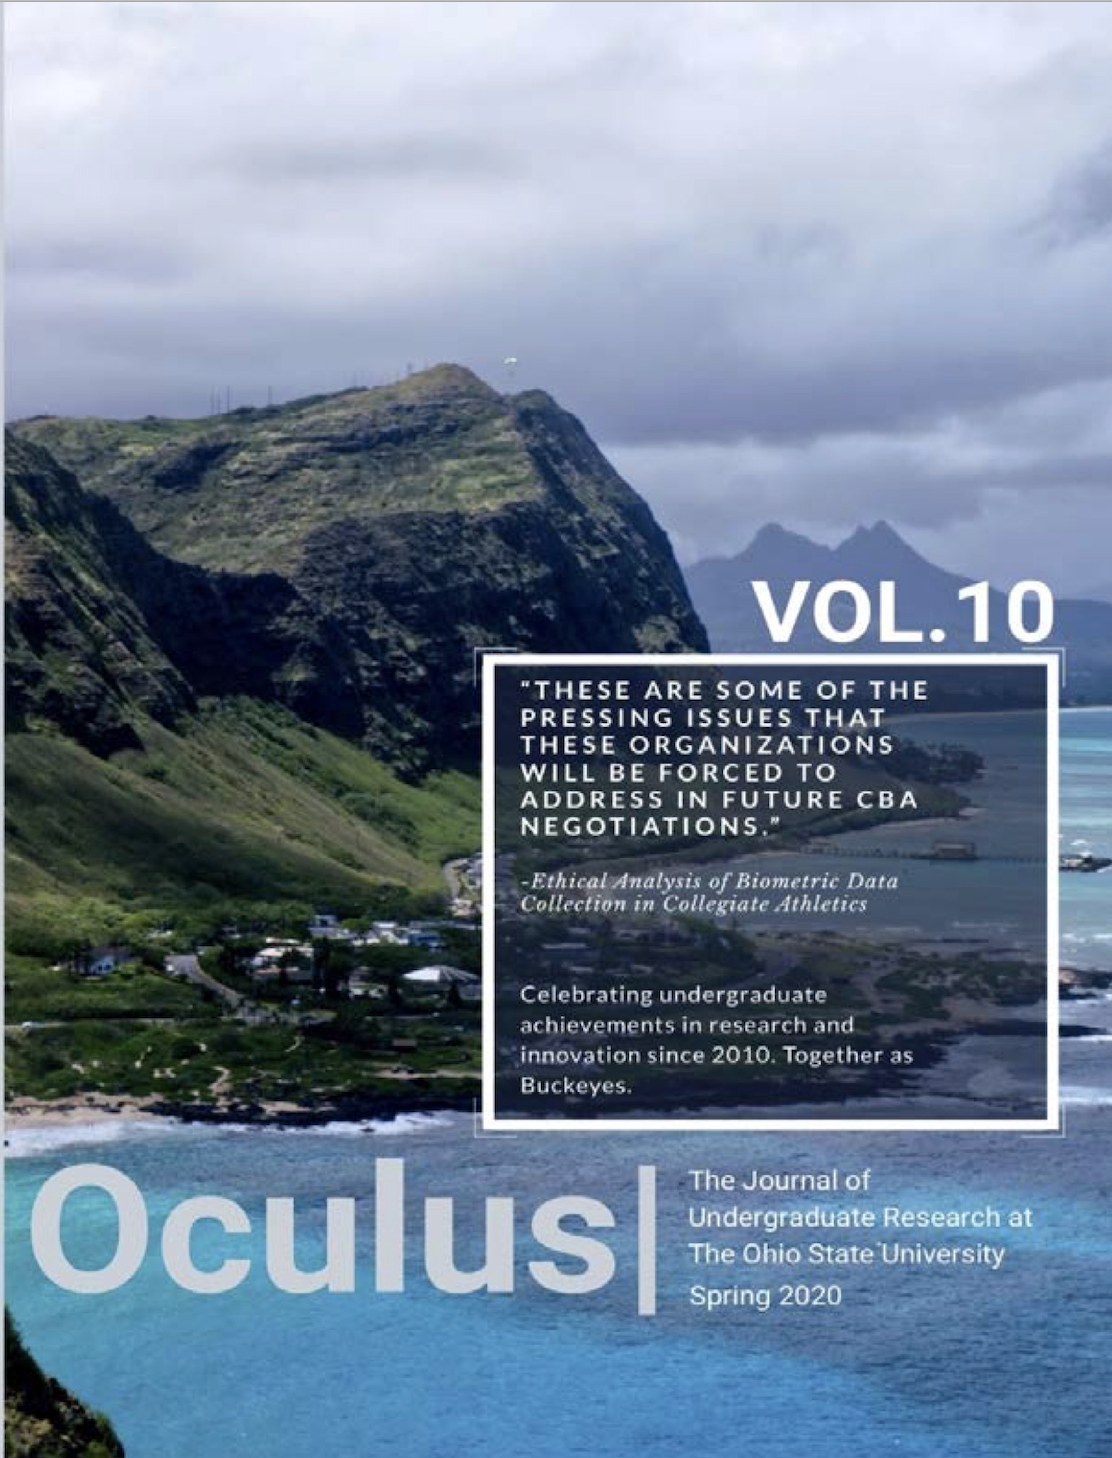 Oculus: Journal of Undergraduate Research at Ohio State, Volume 10 Online, Spring 2020